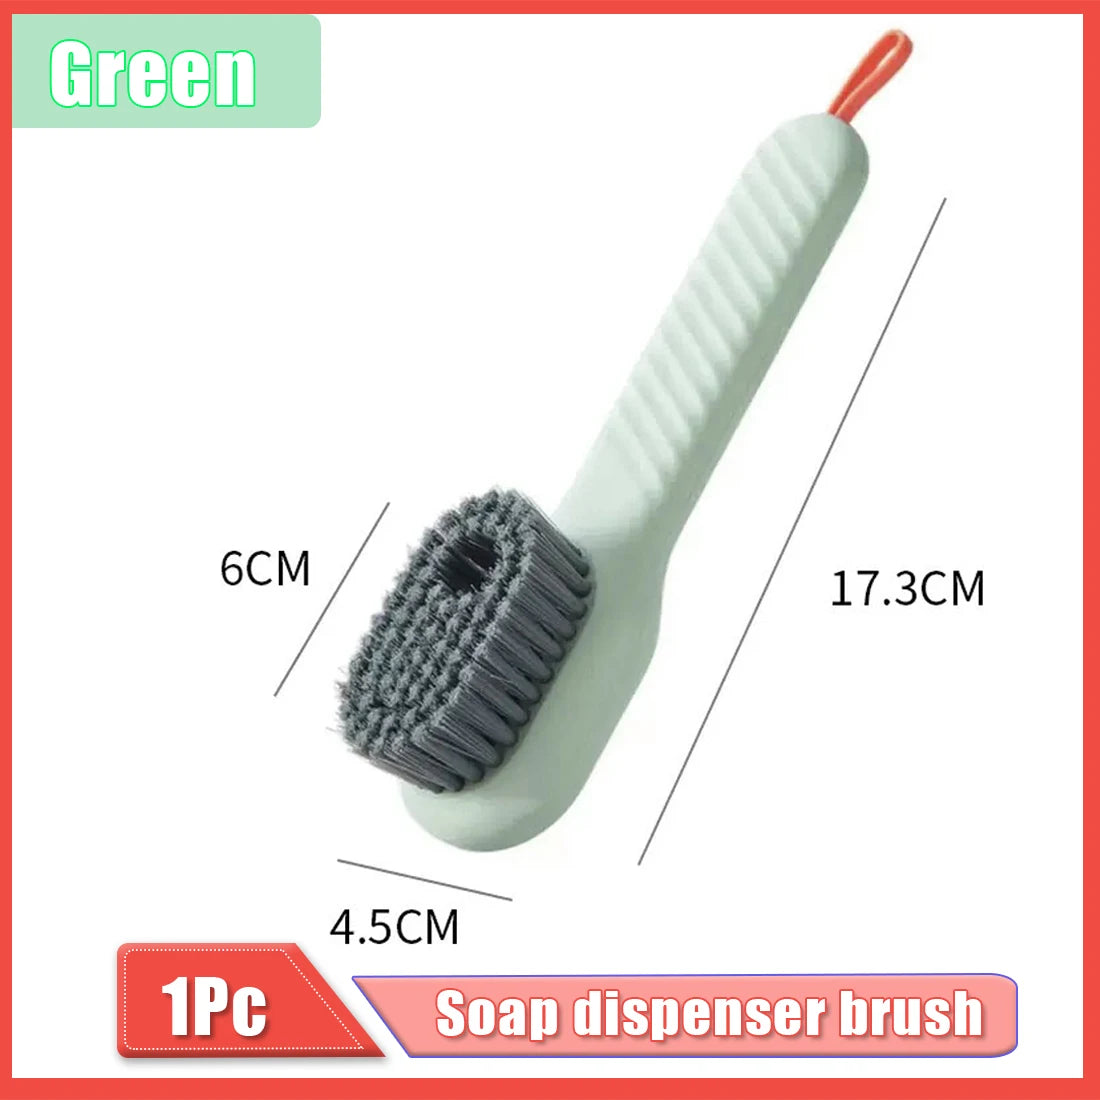 Automatic white soap dispenser brush with soft cleaning bristles and a red handle, suitable for household laundry and shoe cleaning tasks.